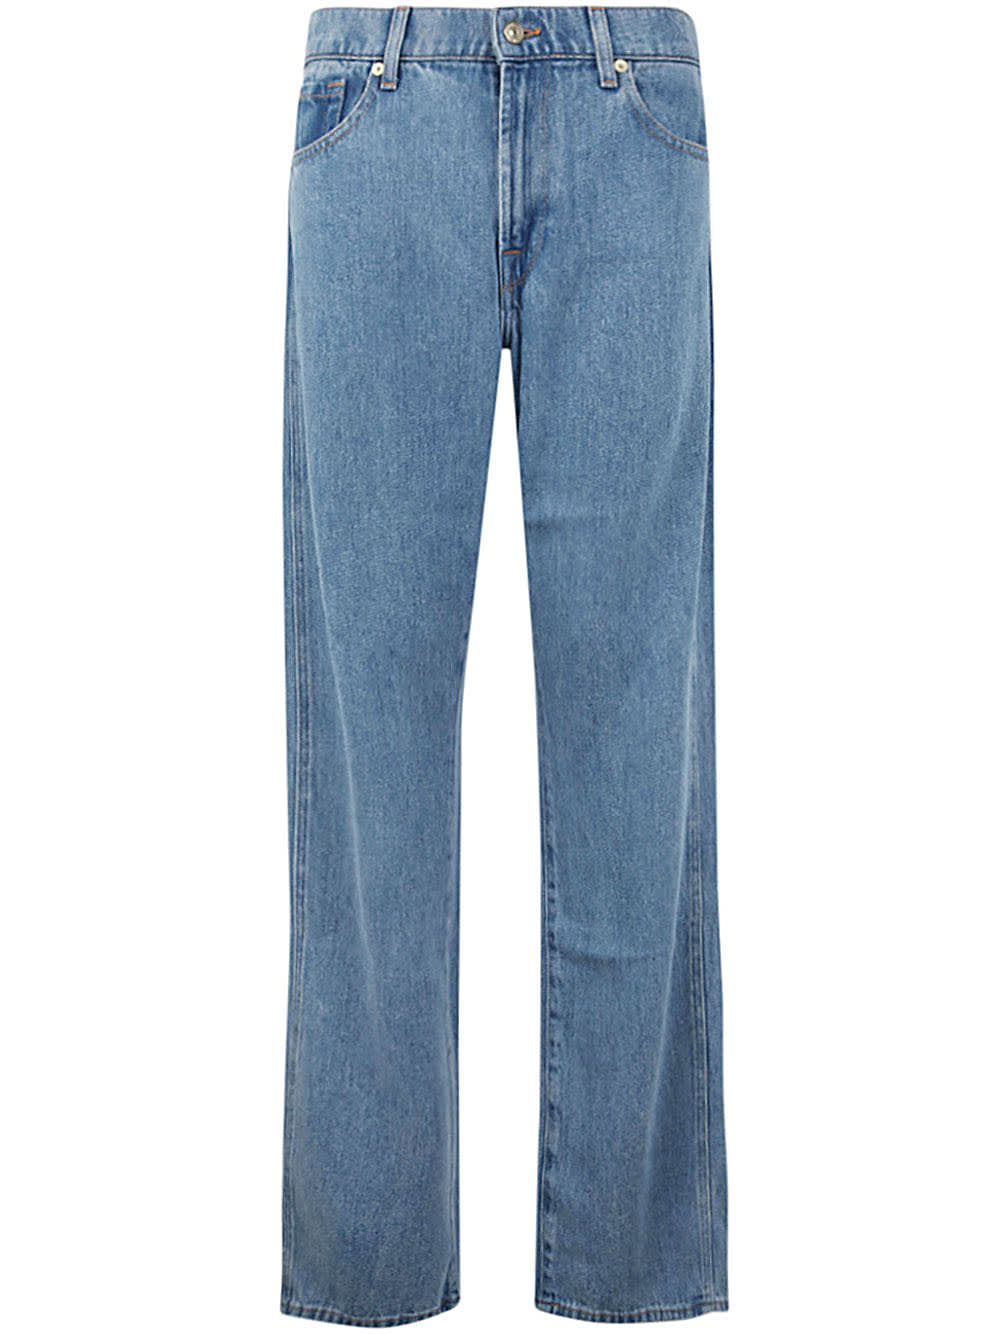 Shop 7 For All Mankind Tess Trouser Valentine In Light Blue